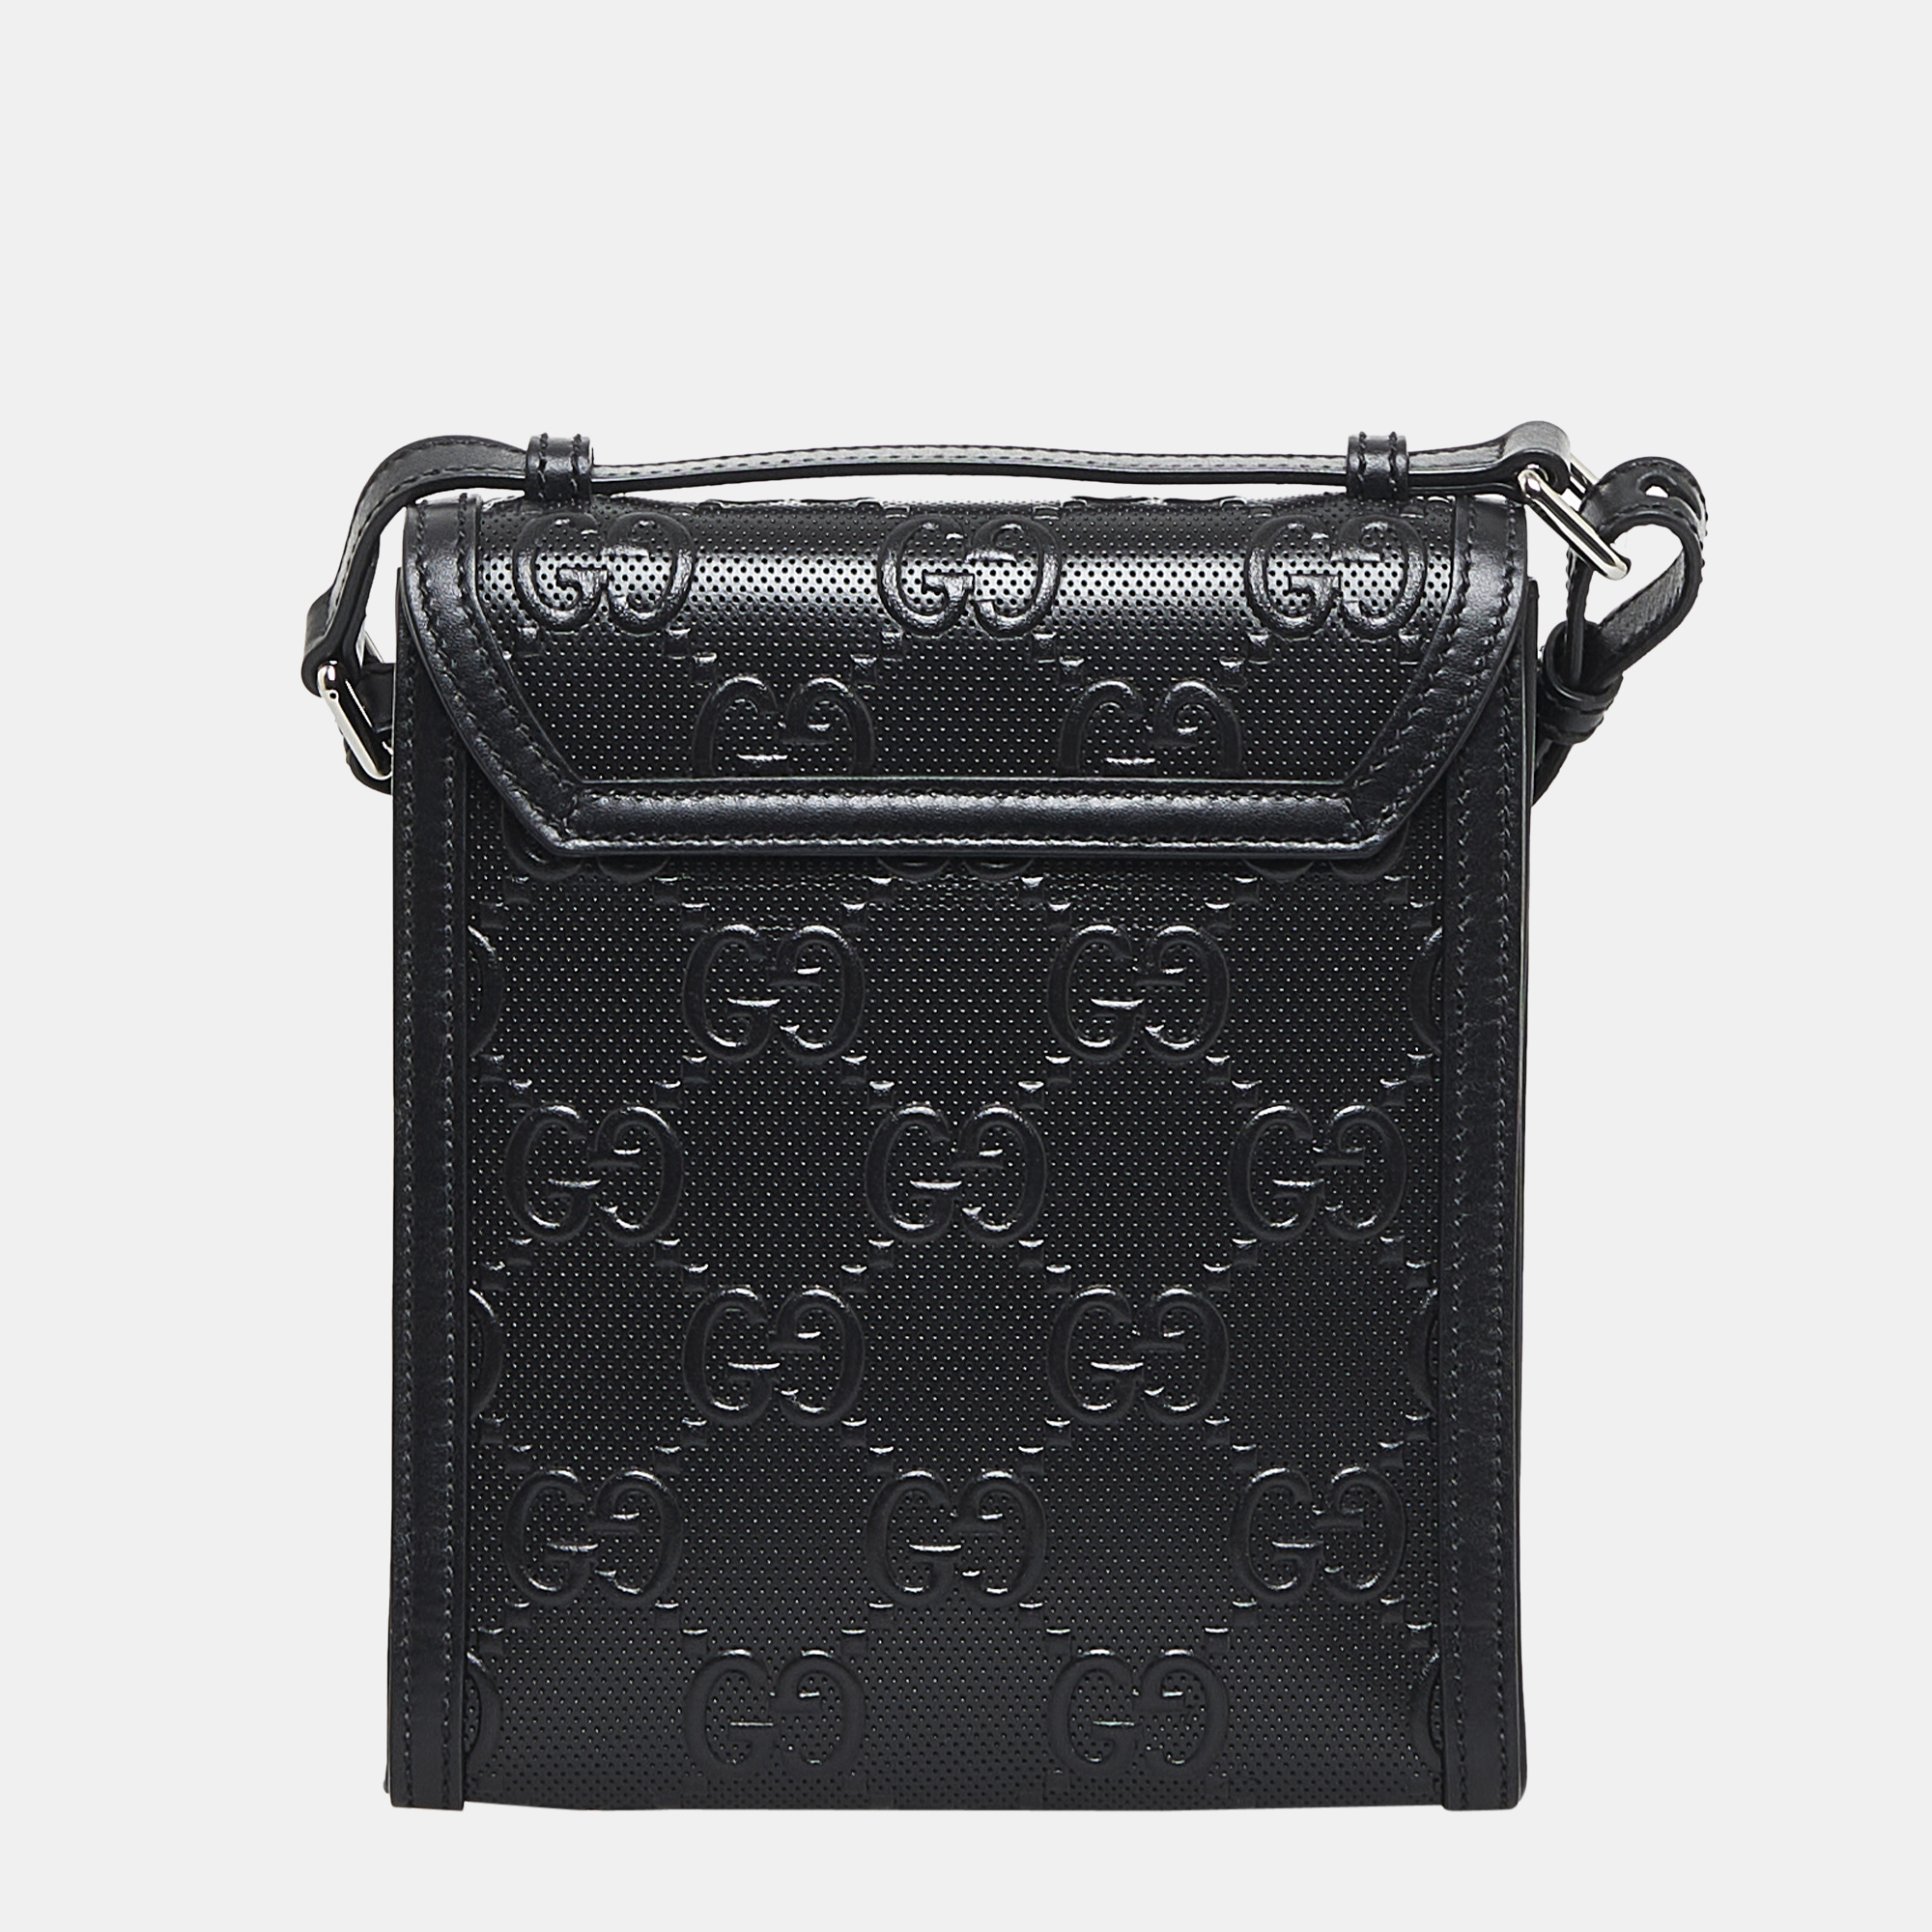 Gucci Black GG Embossed Perforated Messenger Bag